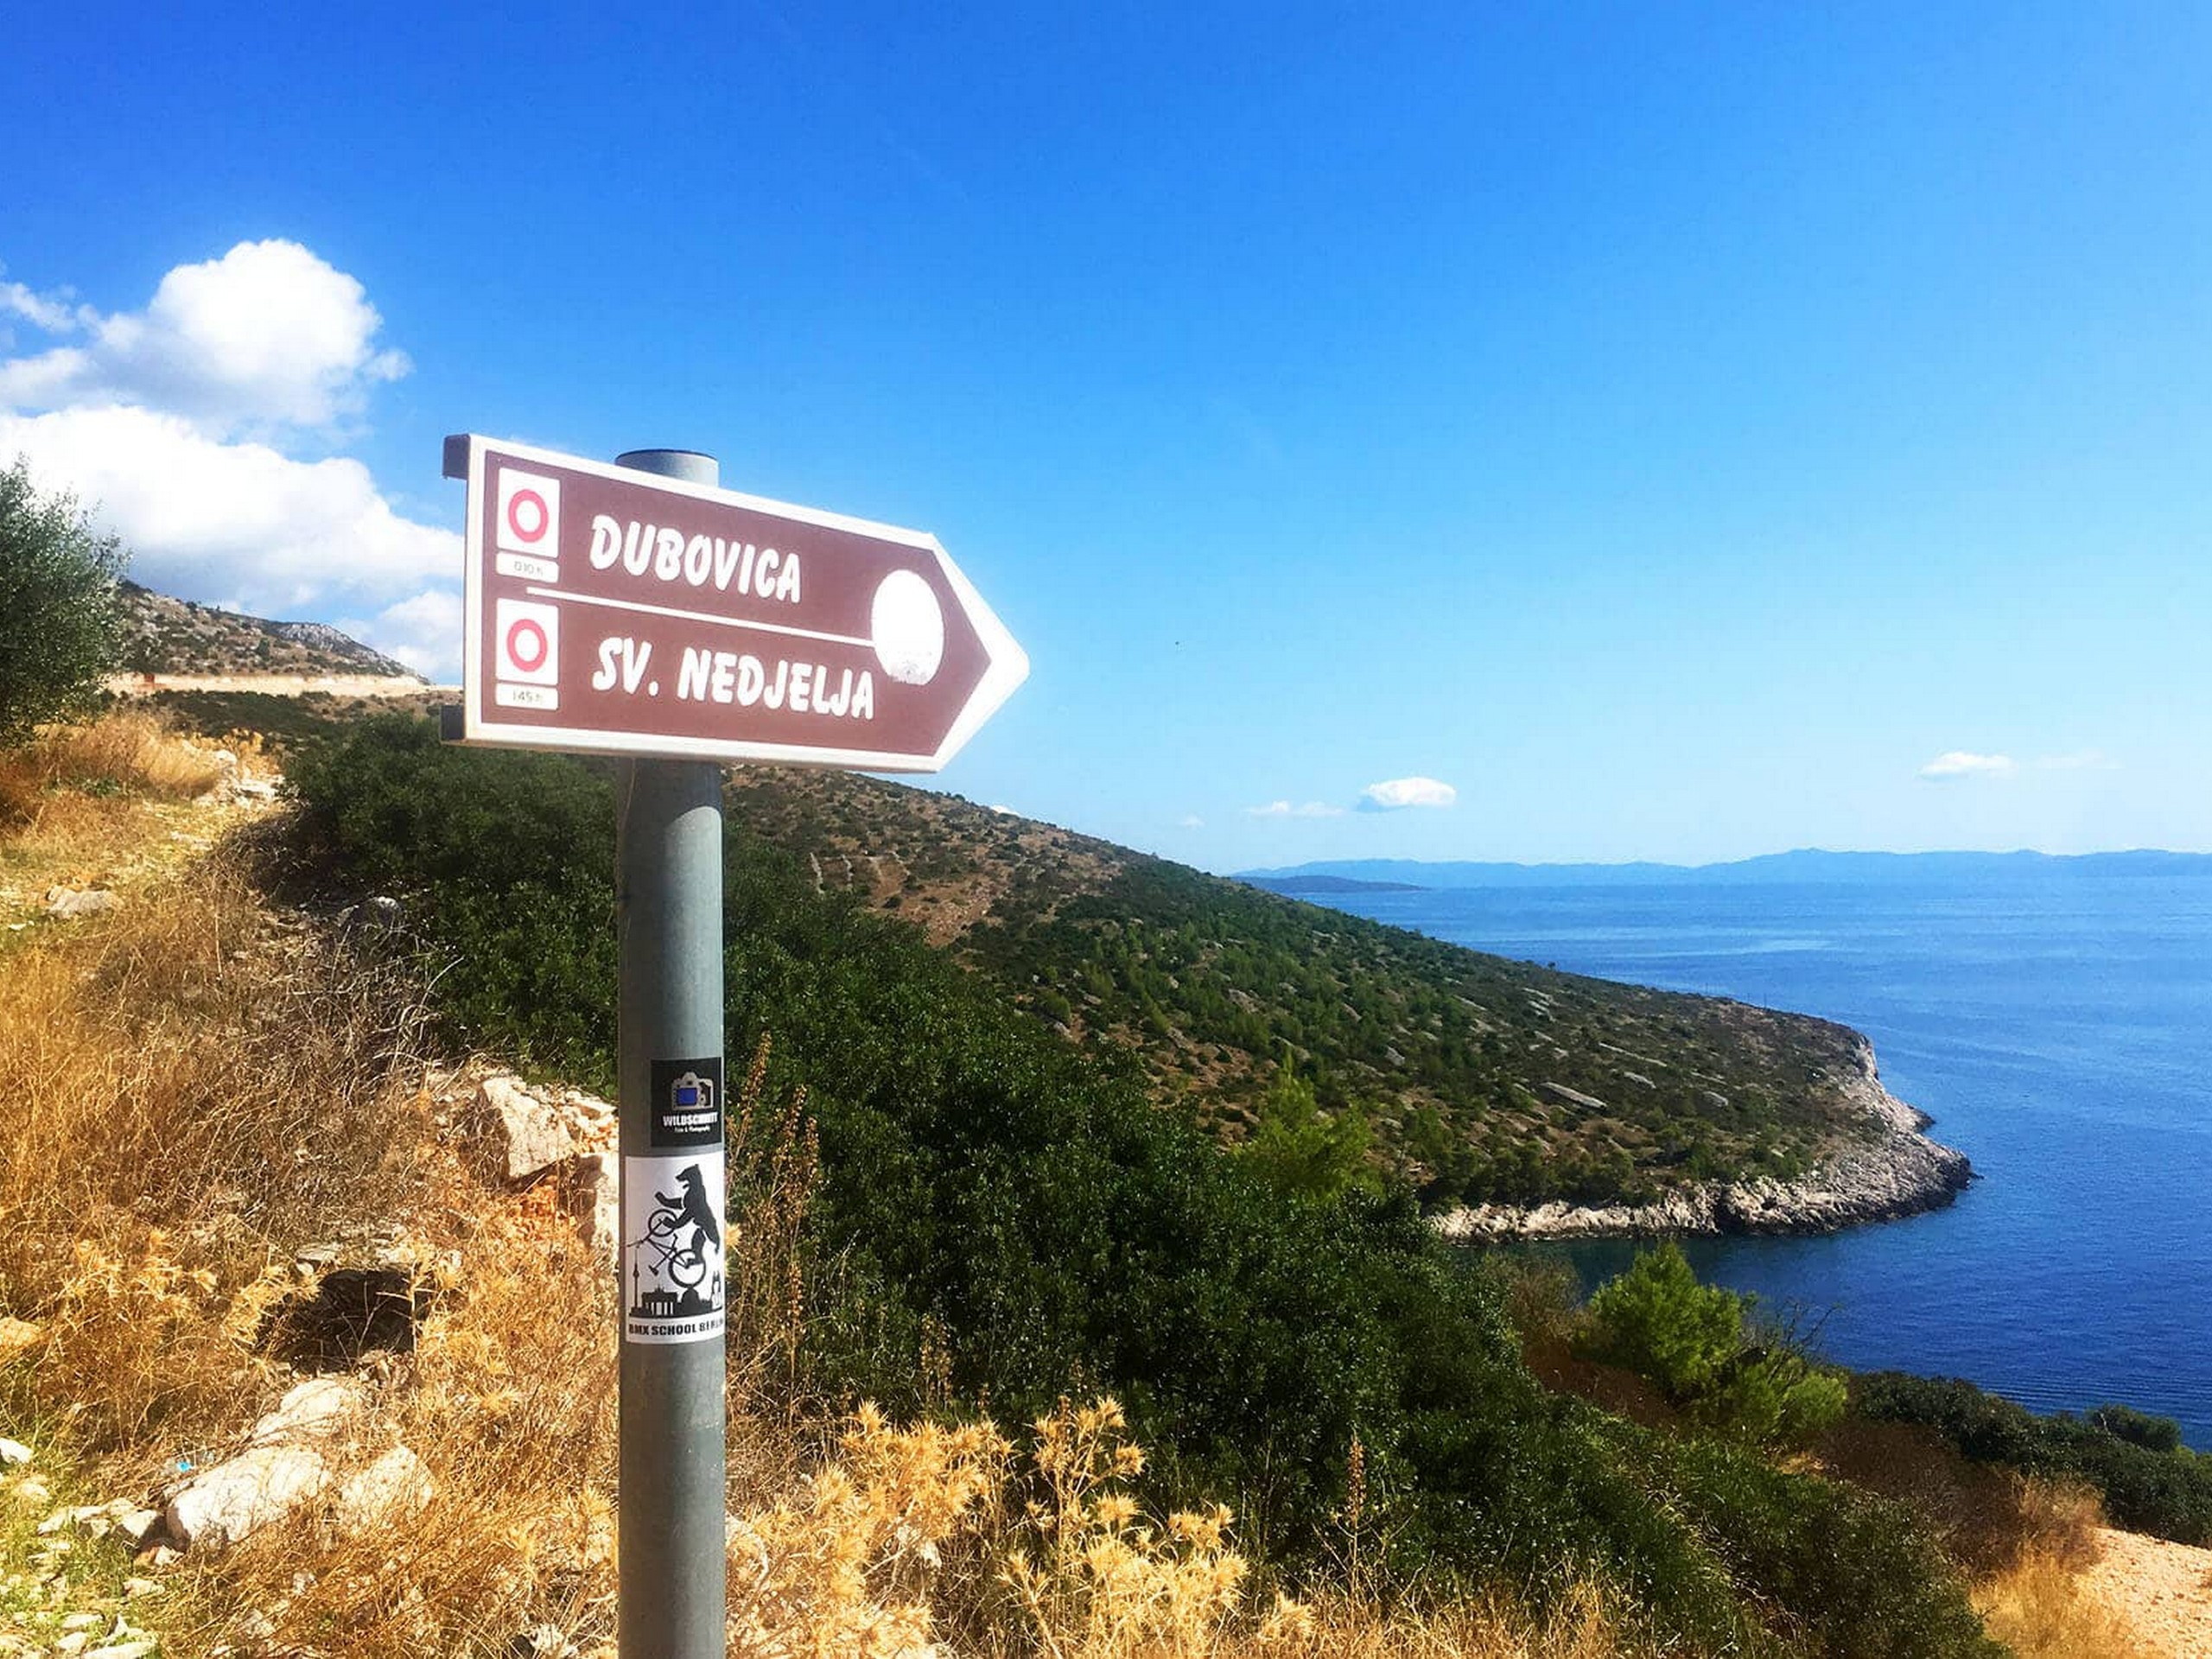 Route signage along one of the trails in Croatia